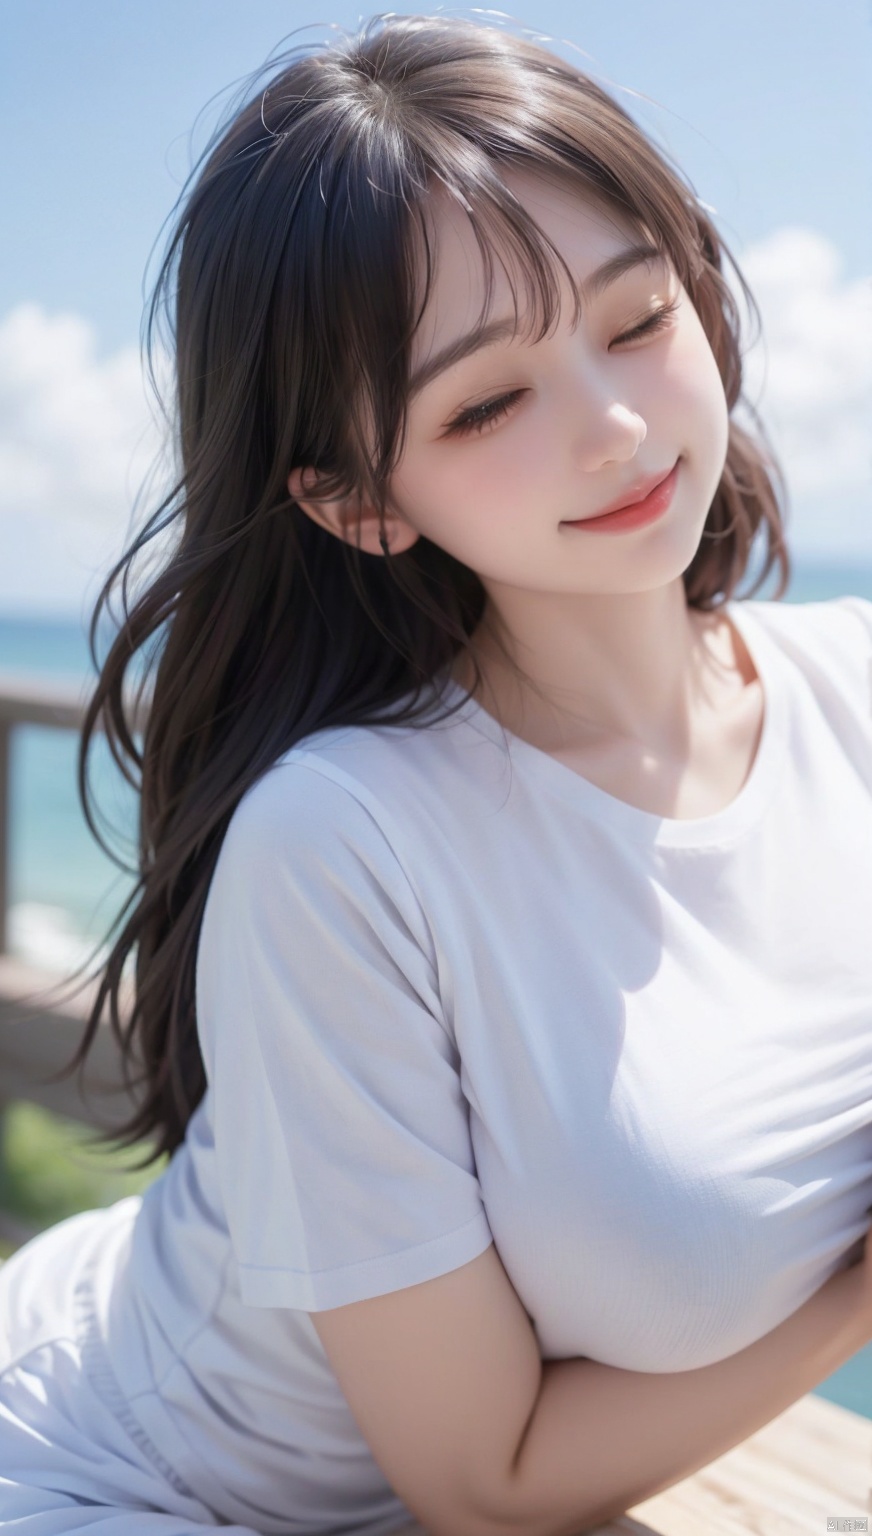  1 girl, European and American face, 70 degree face, looking up ,eyes closed,0.03, revealing ears, brown hair,, white short sleeved shirt,, blue sky background,light cloud, Purity Portait,（smile：0.2）,huge_breasts